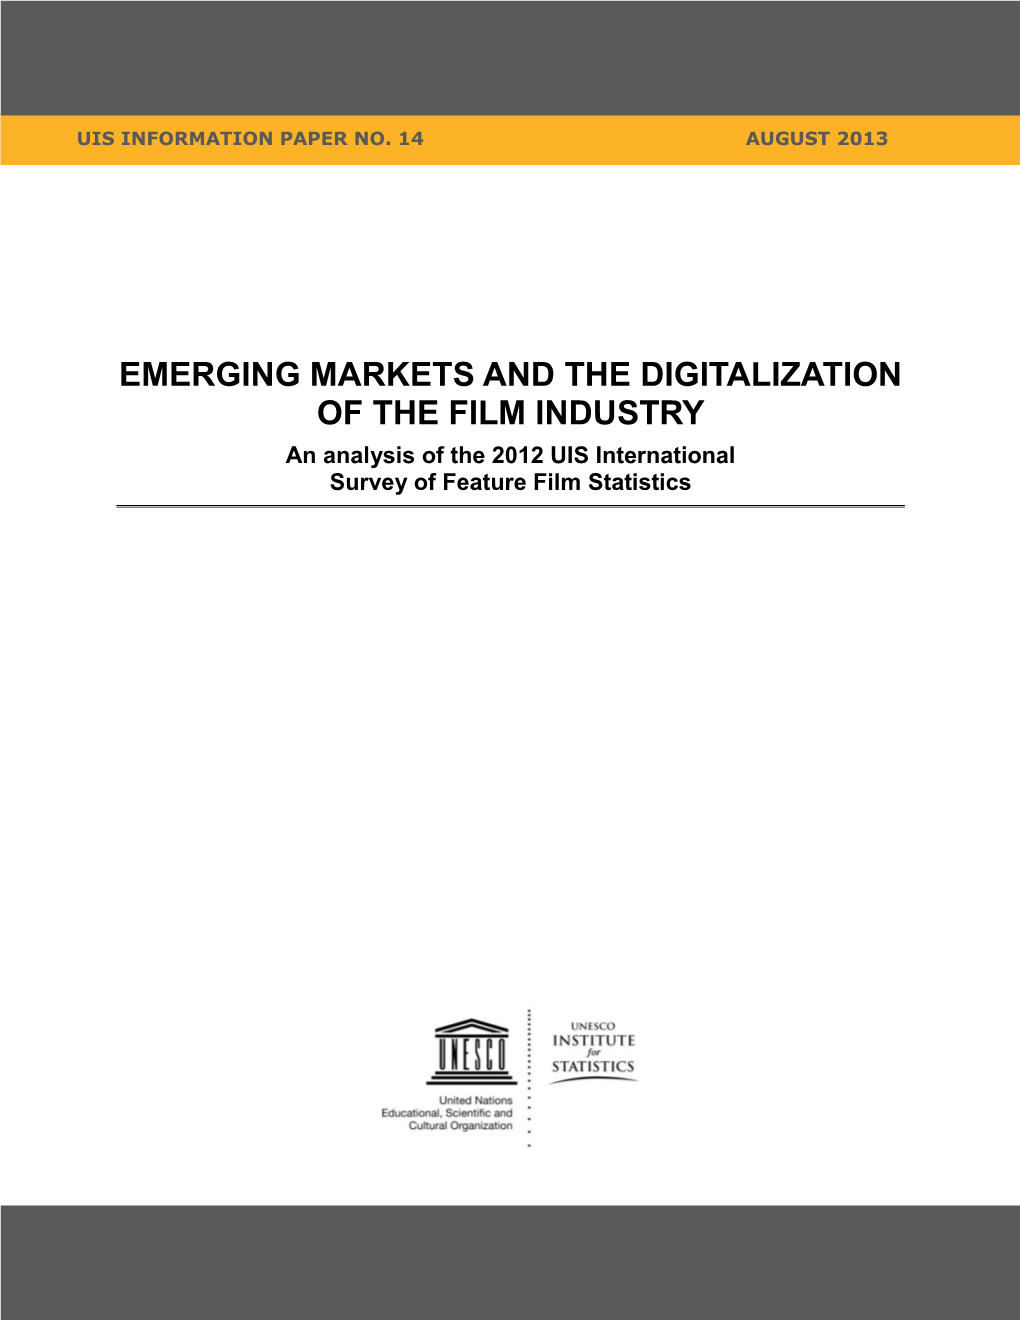 EMERGING MARKETS and the DIGITALIZATION of the FILM INDUSTRY an Analysis of the 2012 UIS International Survey of Feature Film Statistics